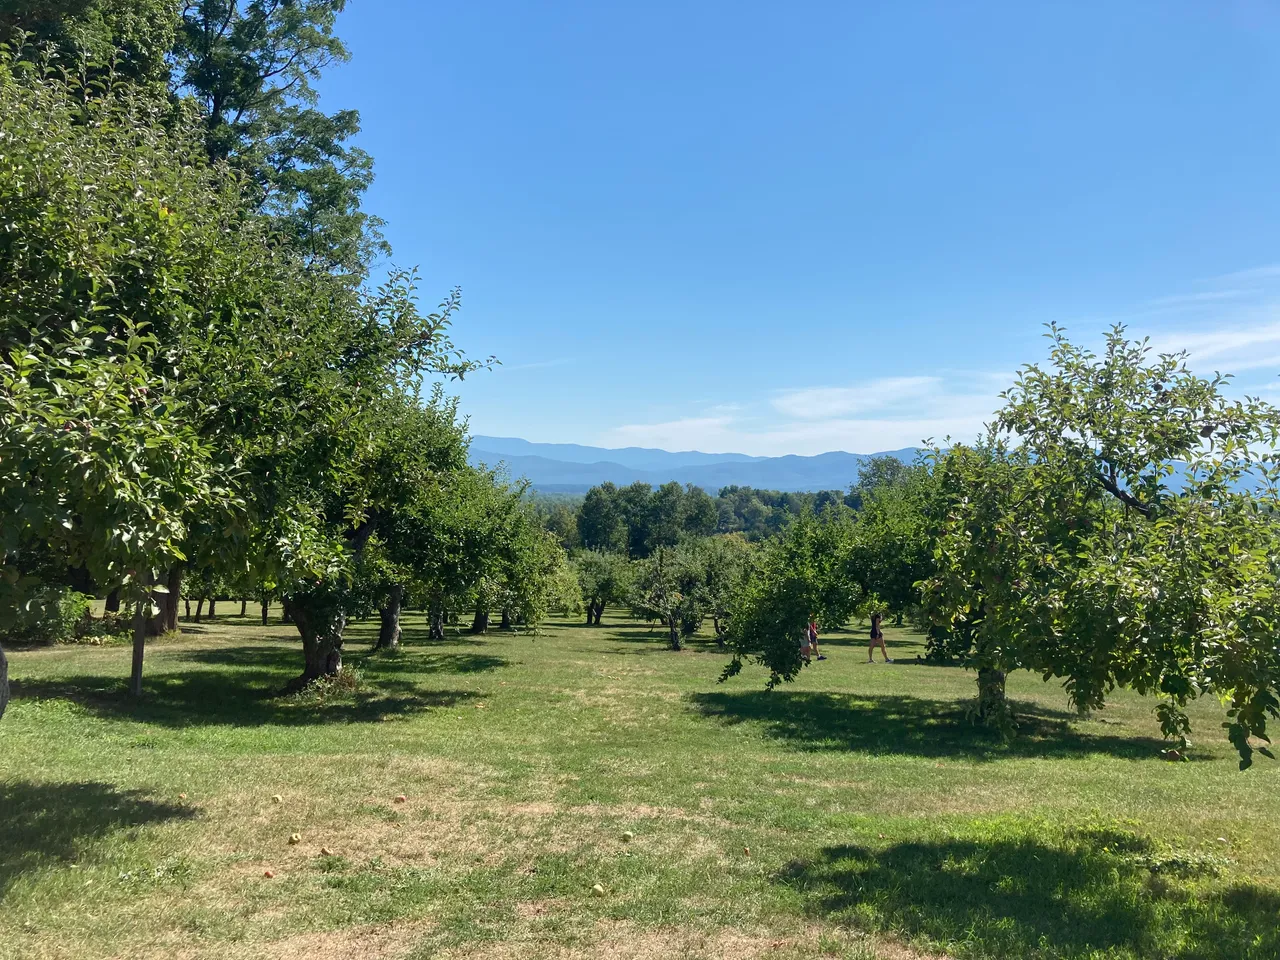 View of the orchard